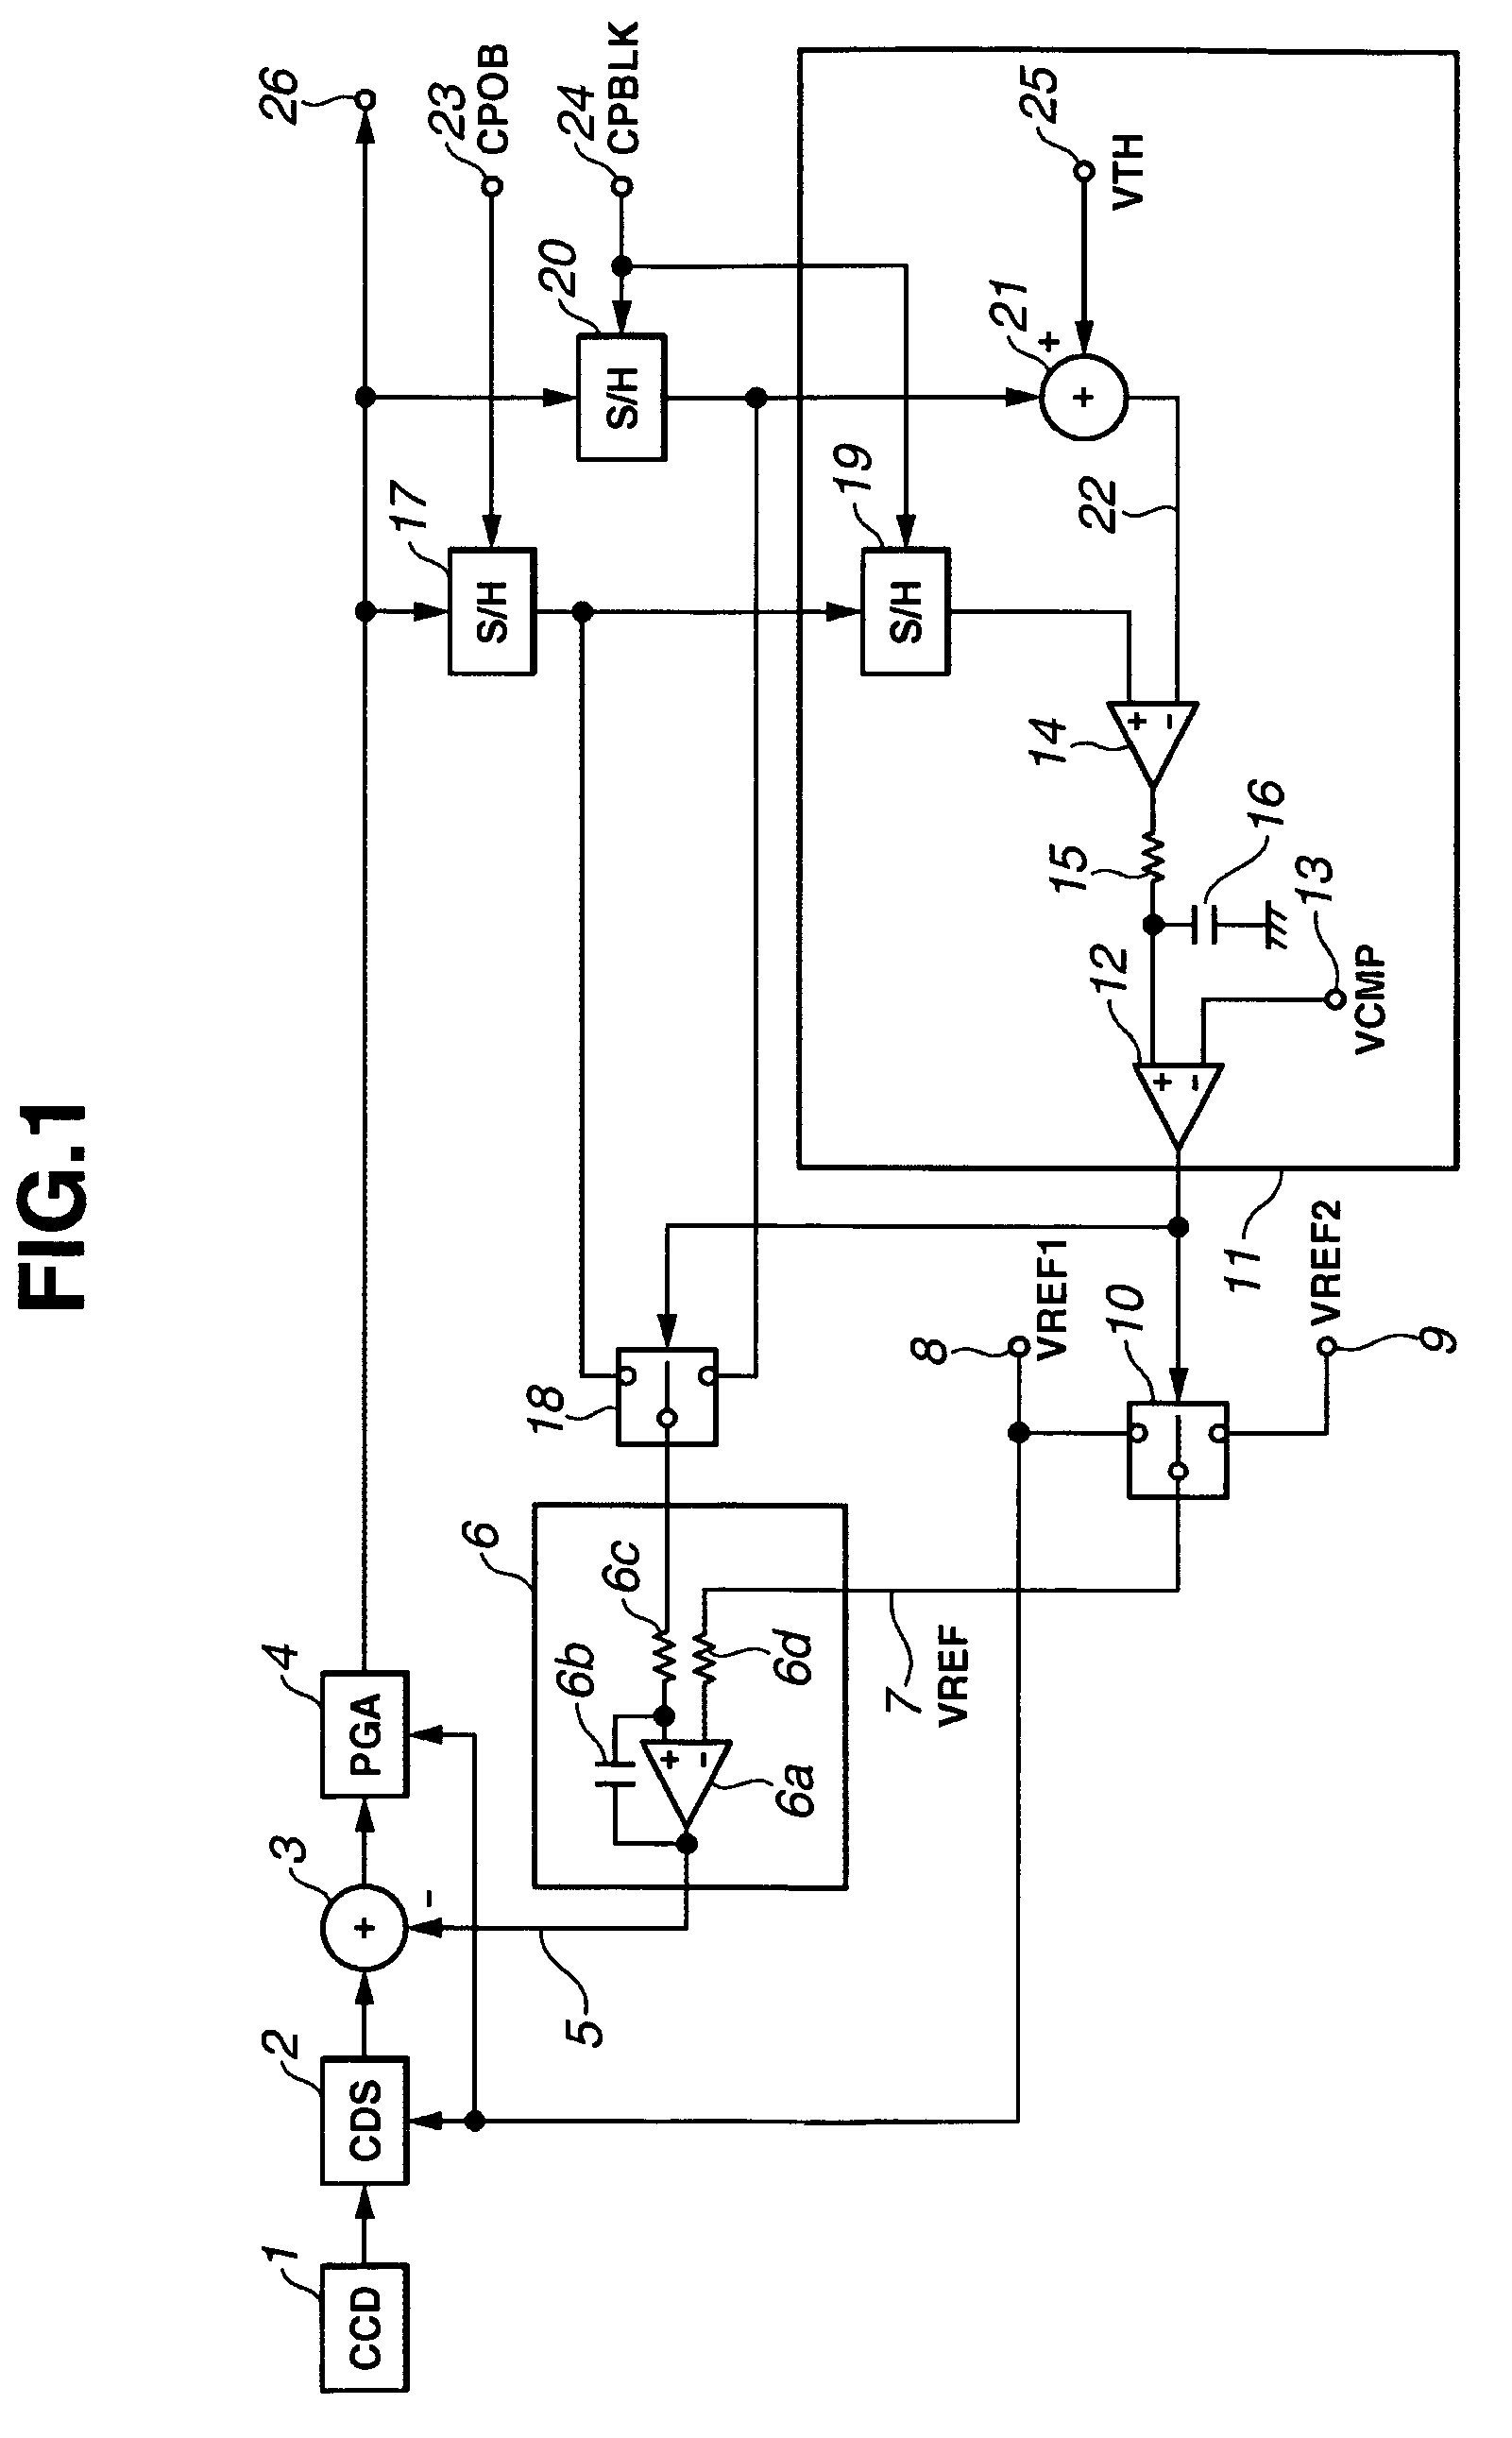 Image pickup apparatus for clamping optical black level to a predetermined level